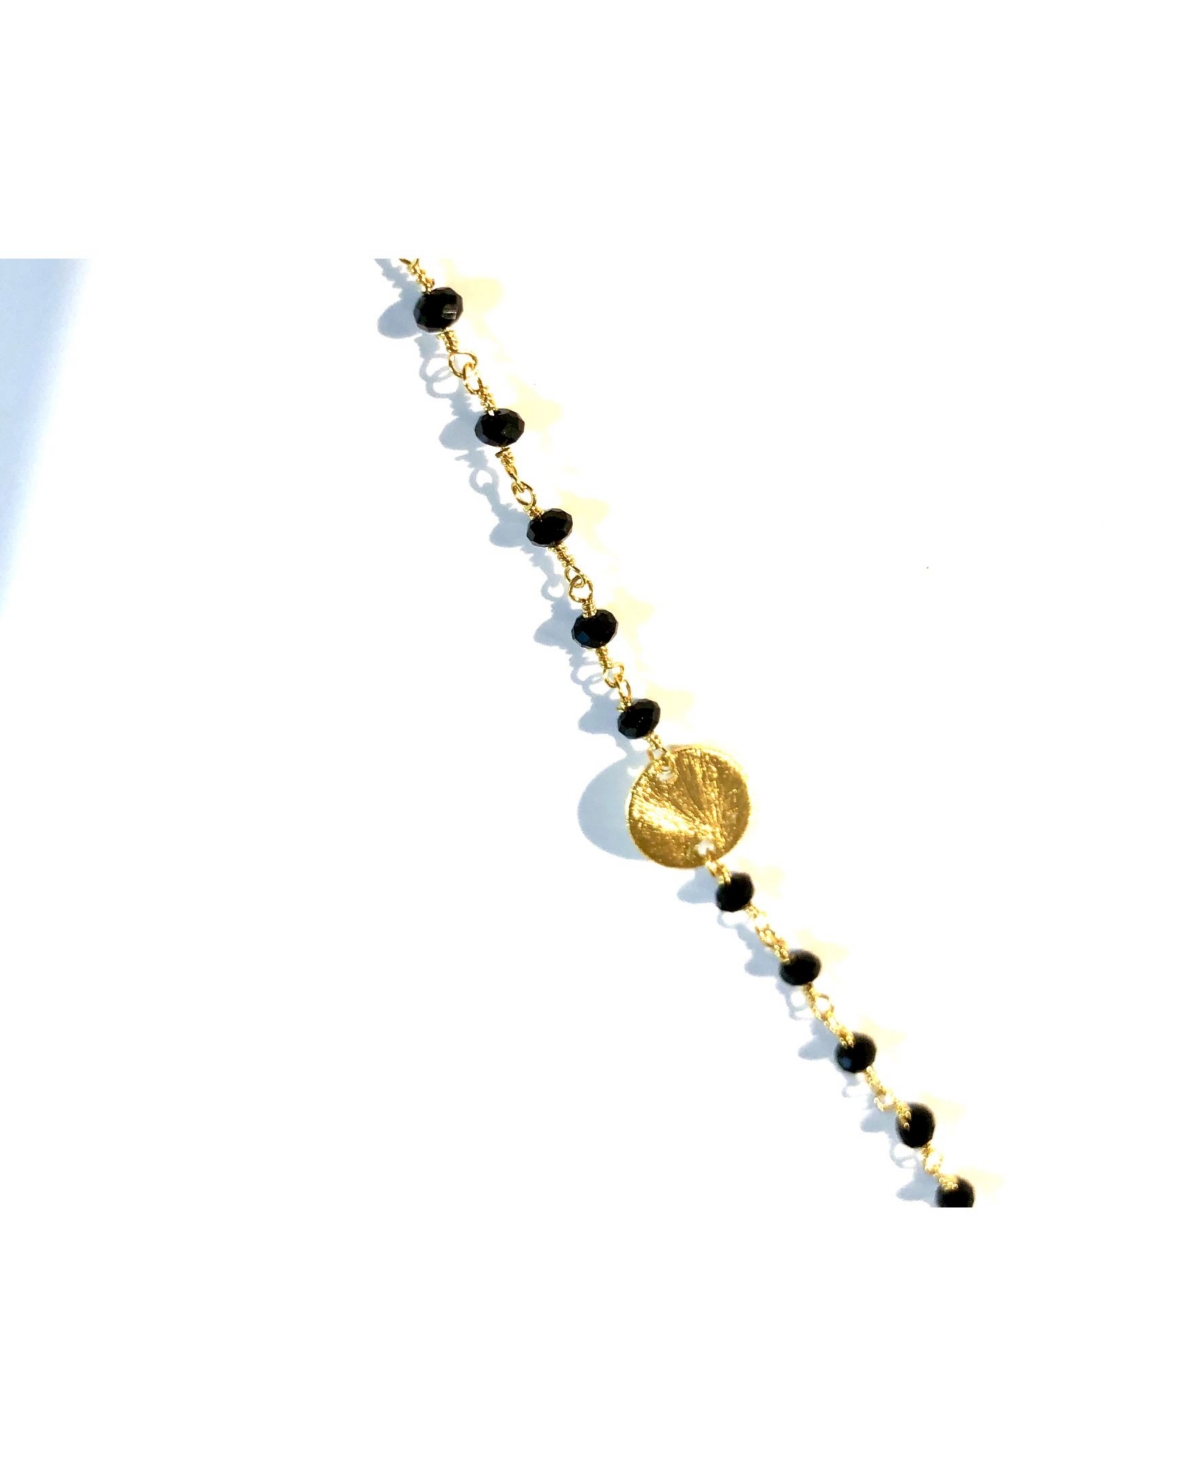 ROBERTA SHER DESIGNS 14K GOLD FILLED SEMIPRECIOUS STONES AND COIN ACCENTS HANDWRAPPED NECKLACE